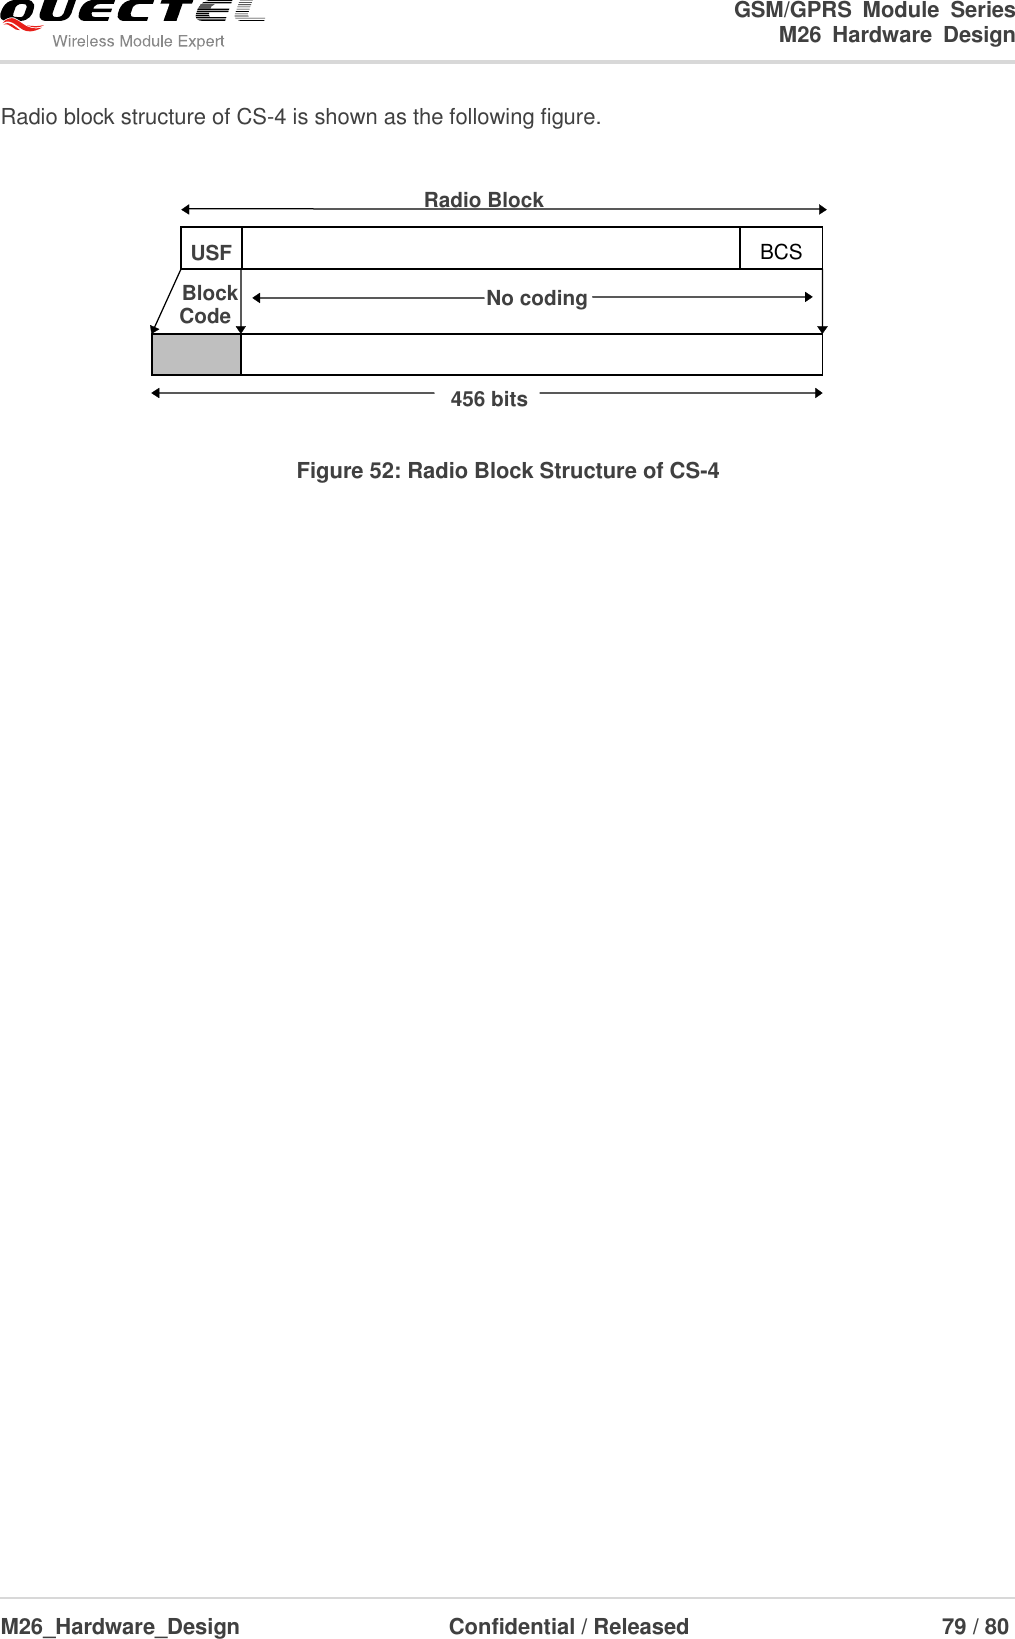                                                                        GSM/GPRS  Module  Series                                                                 M26  Hardware  Design  M26_Hardware_Design                     Confidential / Released                              79 / 80      Radio block structure of CS-4 is shown as the following figure.          Figure 52: Radio Block Structure of CS-4                               Block Code No coding 456 bits USF BCS Radio Block 